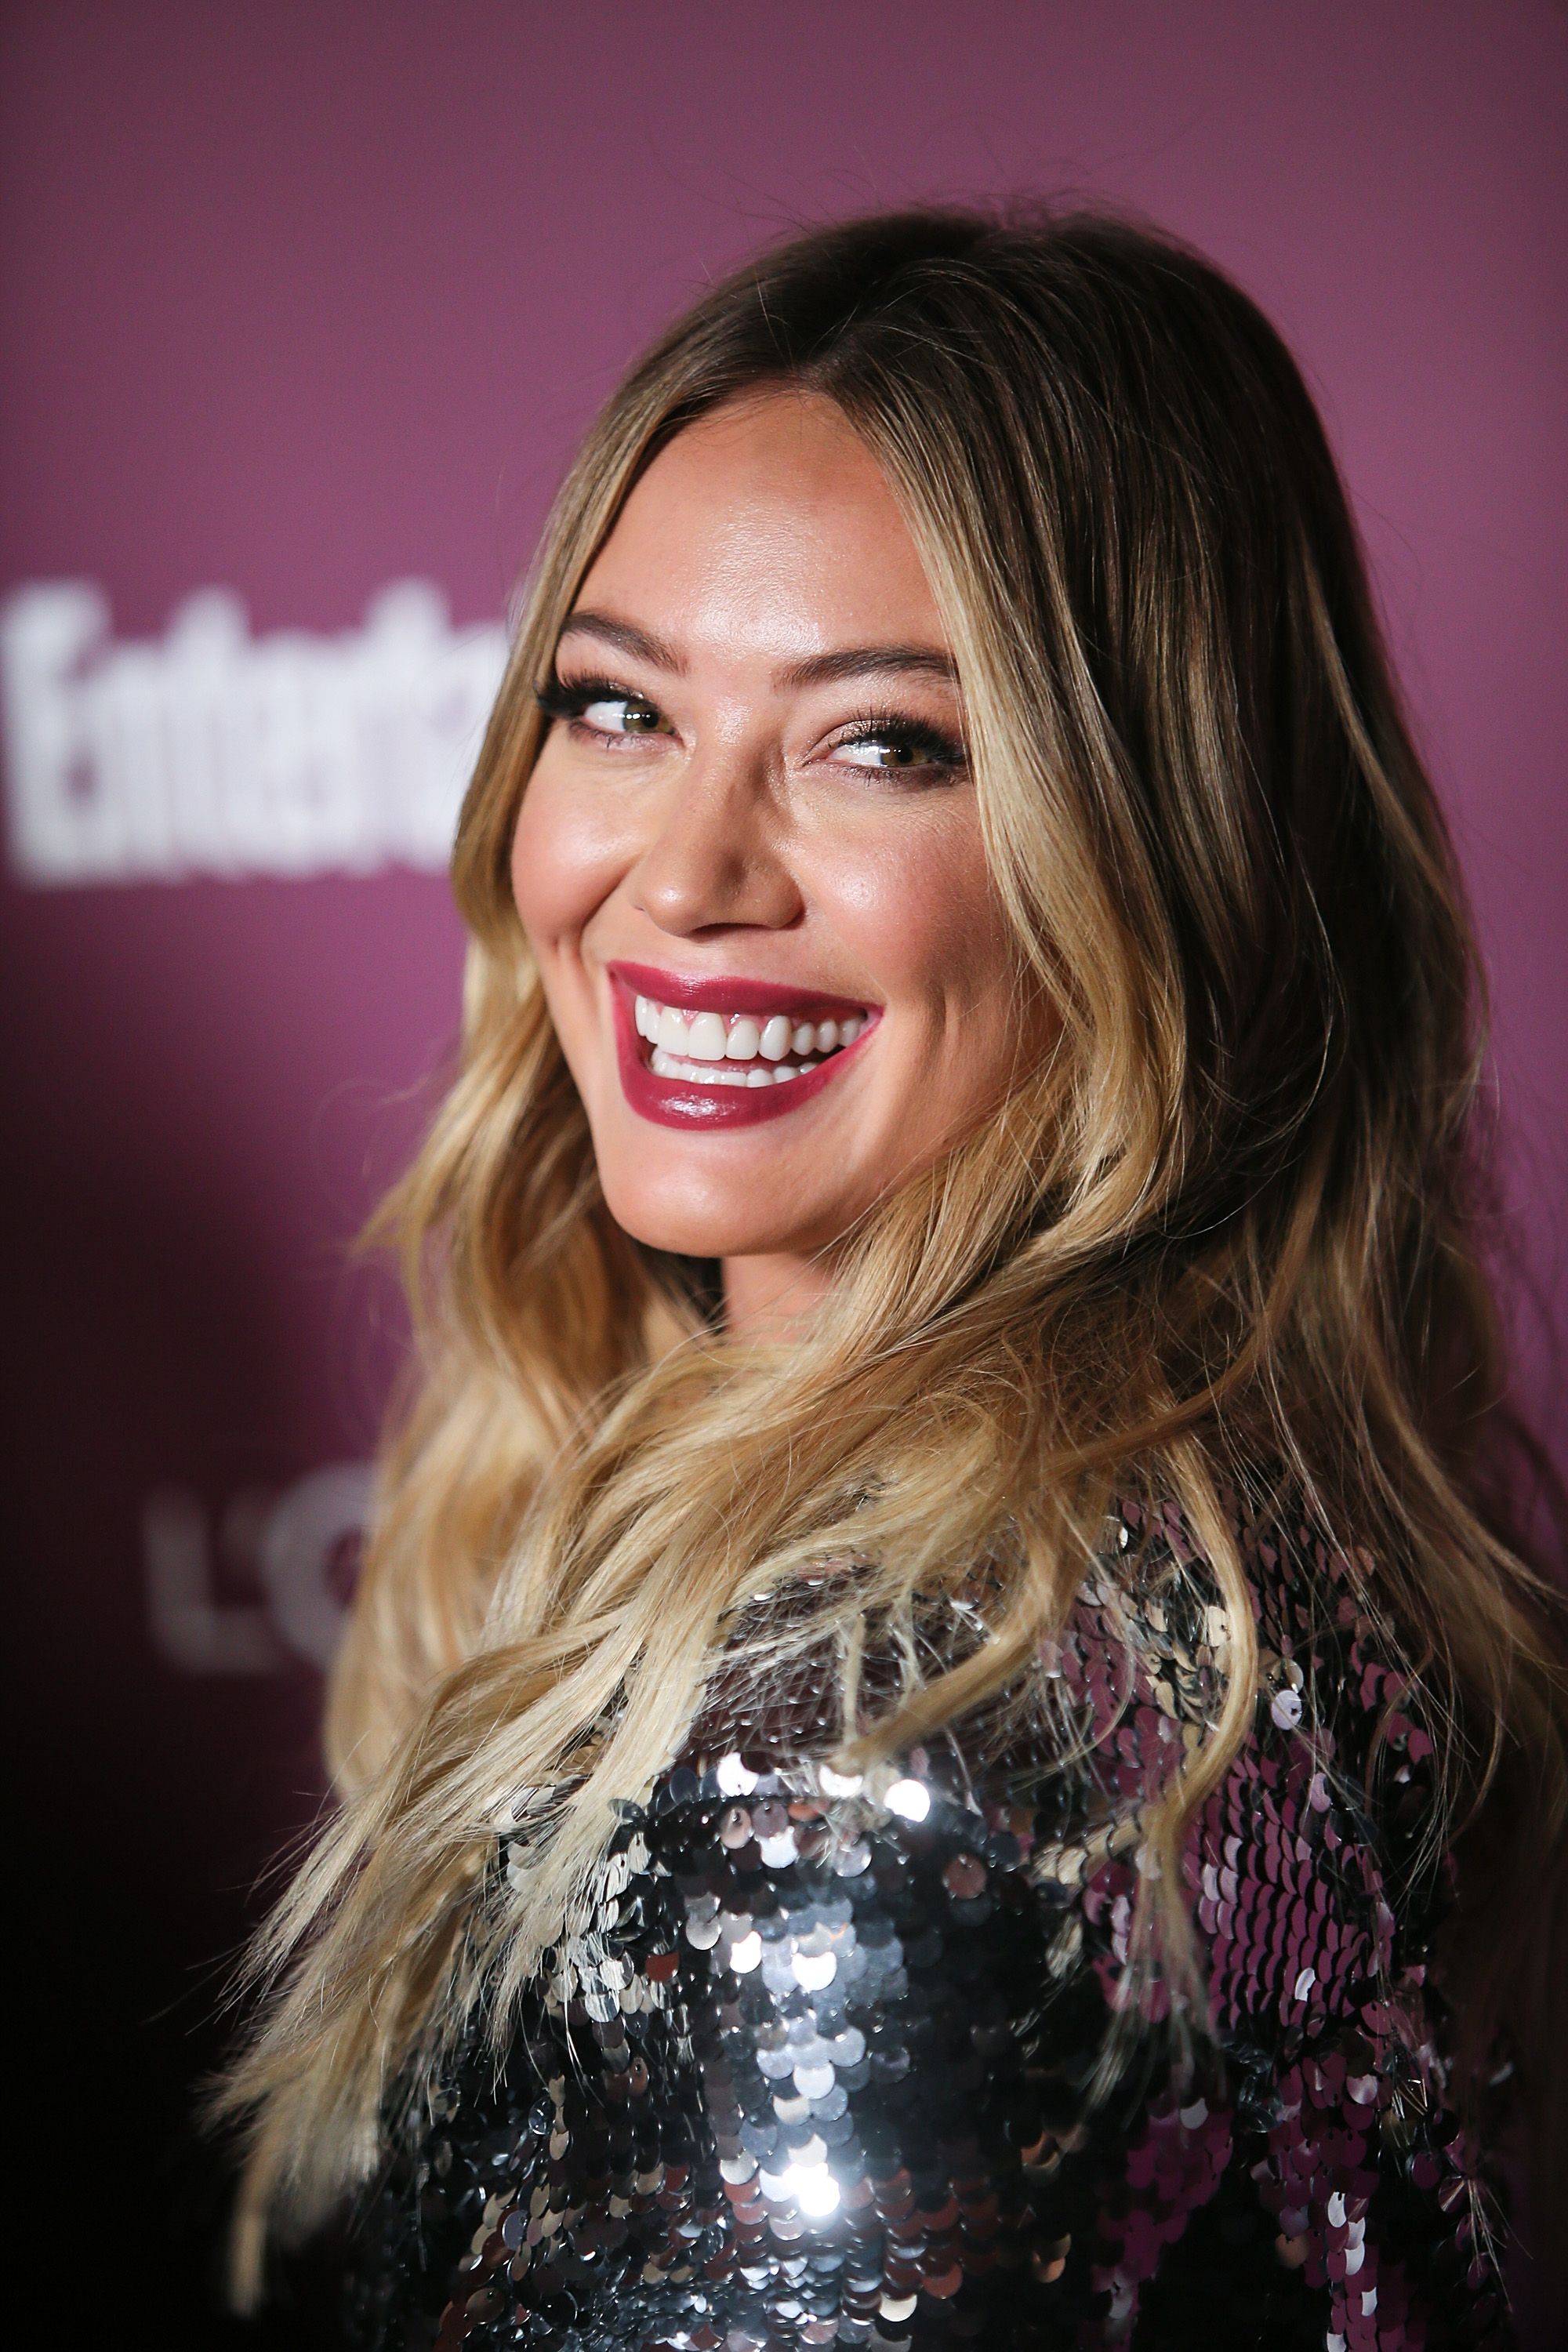 Hilary Duff at The Entertainment Weekly's 2017 Pre-Emmy Party at the Sunset Tower Hotel in West Hollywood, California | Photo: Getty Images